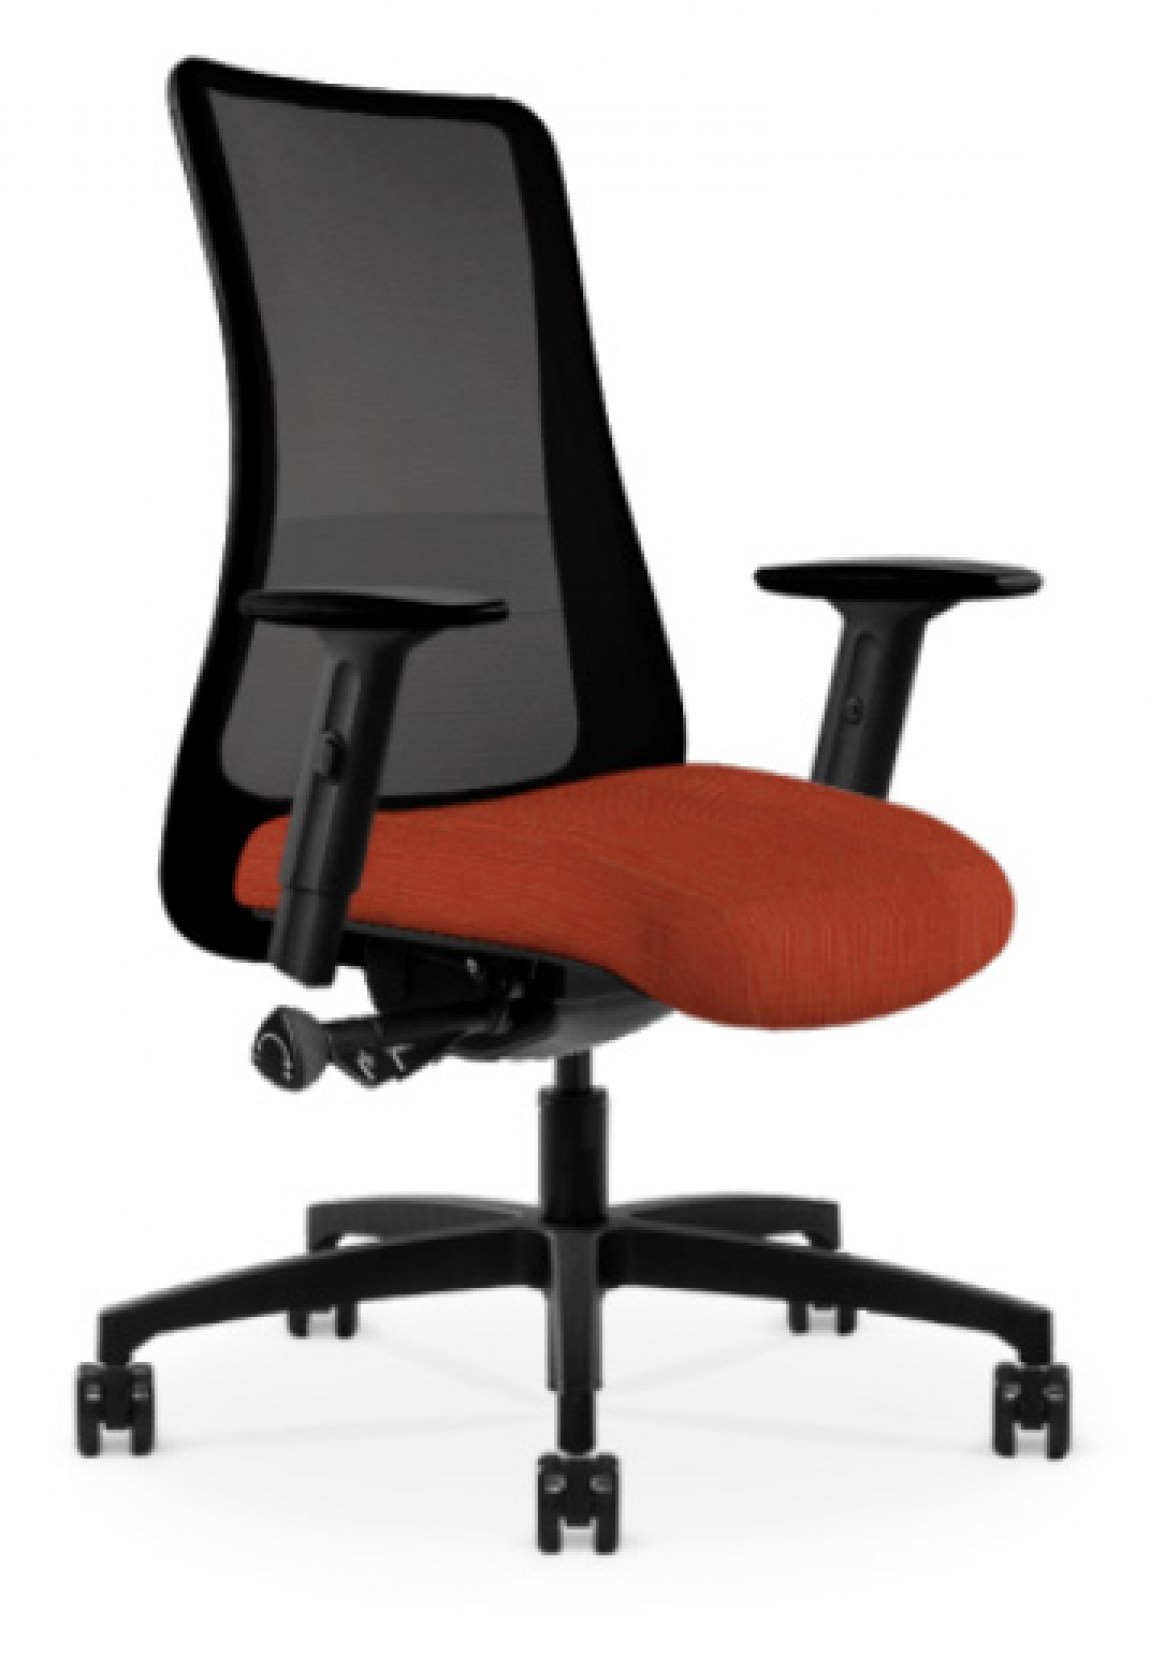 Black Copper Mesh Antimicrobial Office Chair w/ Red-Orange Seat